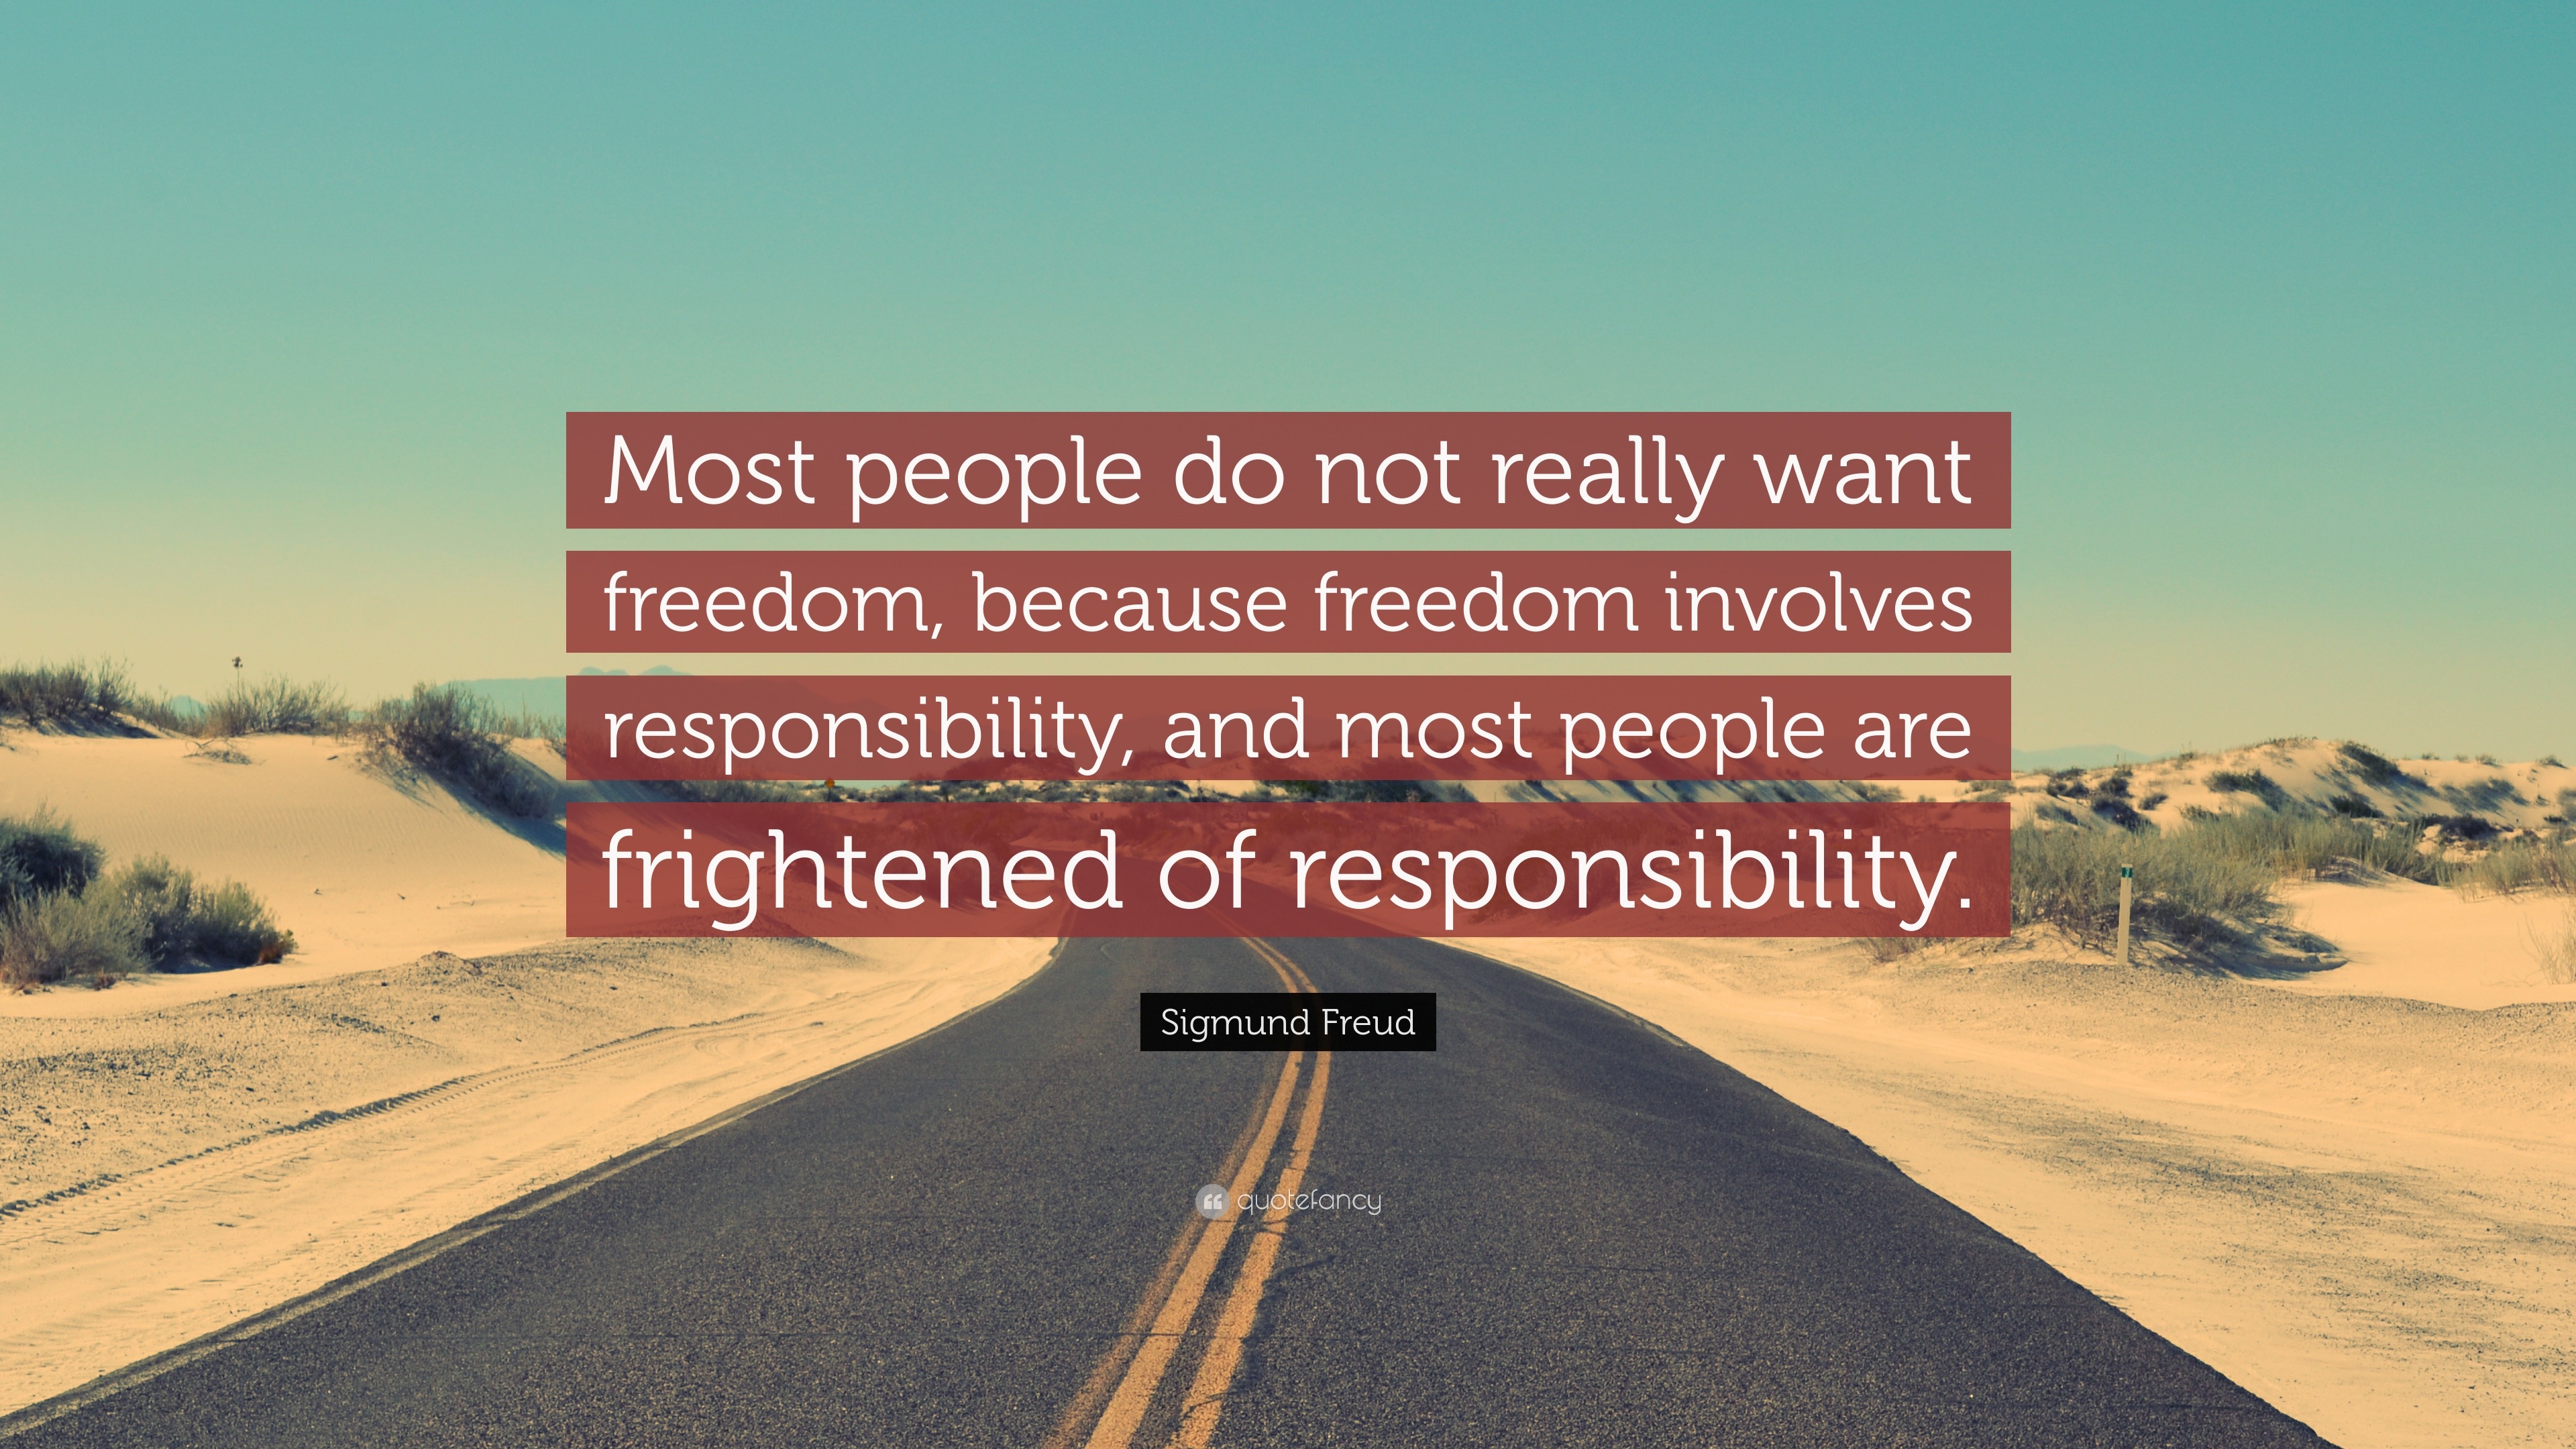 Sigmund Freud Quote “Most people do not really want